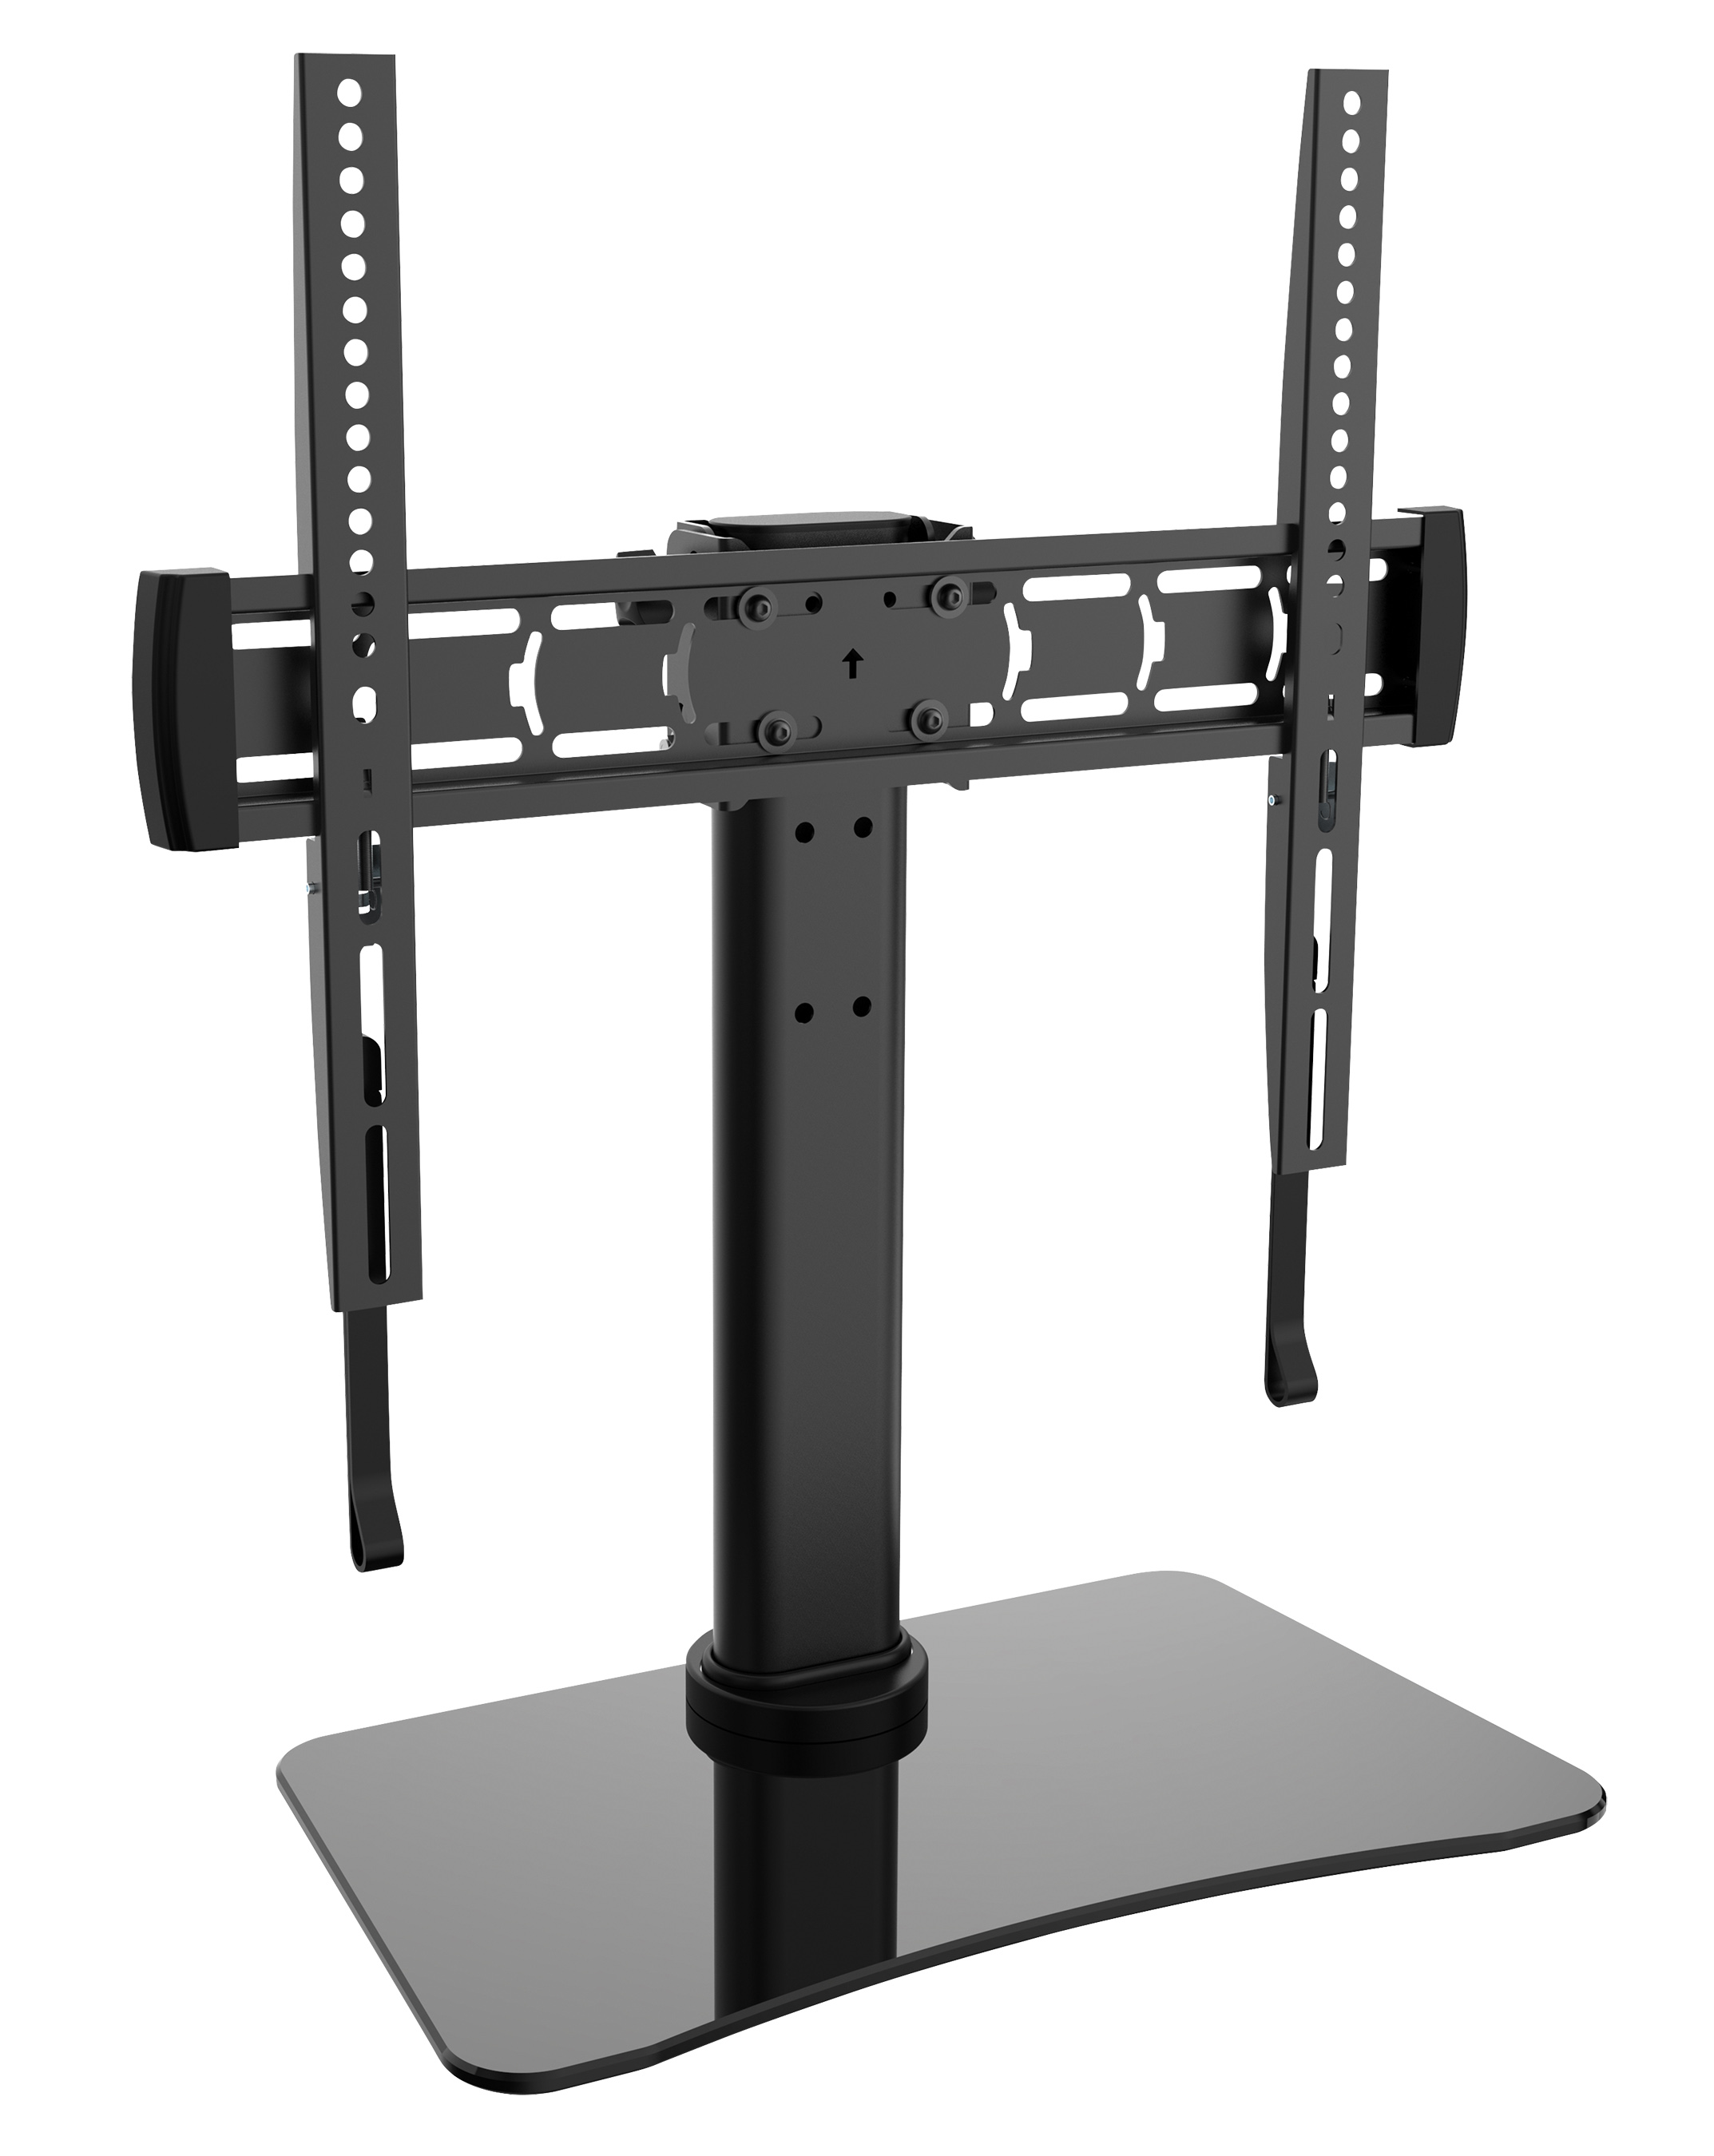 PTS4X4 Universal TV Stand with Swivel for 32" to 60" TVs